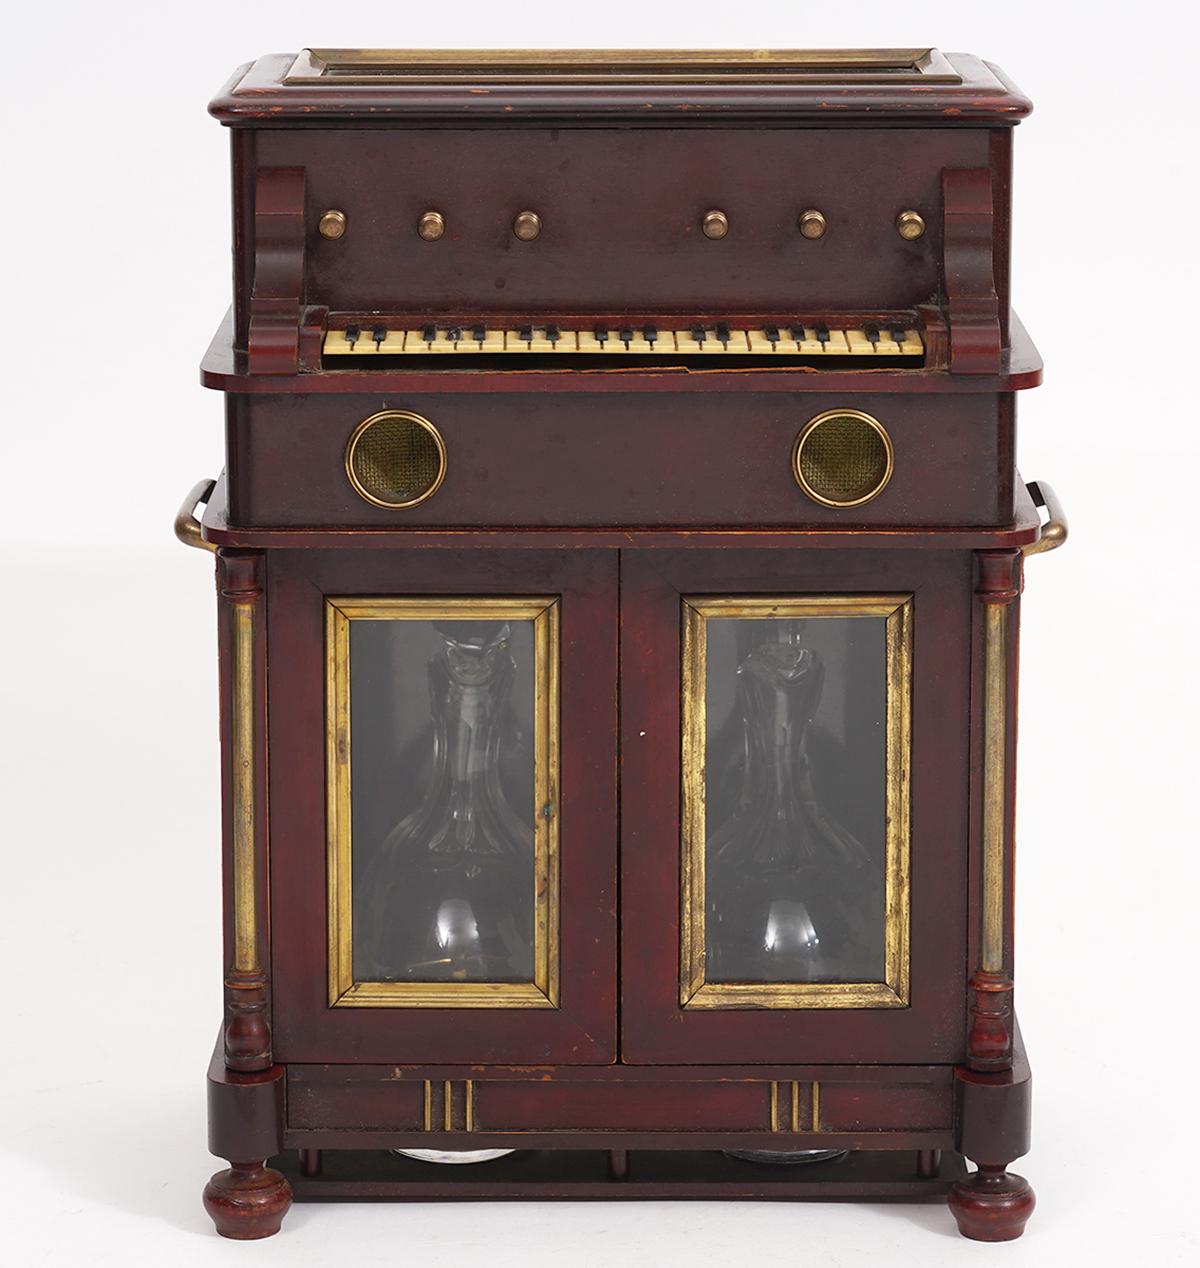 This rare and outstanding upright piano design tantalus or 'cave à liqueur' dating to around 1890 provides both liqueur and music. Simply press a button and one of two delightful melodies from the hidden music box begins to play, causing the piano's